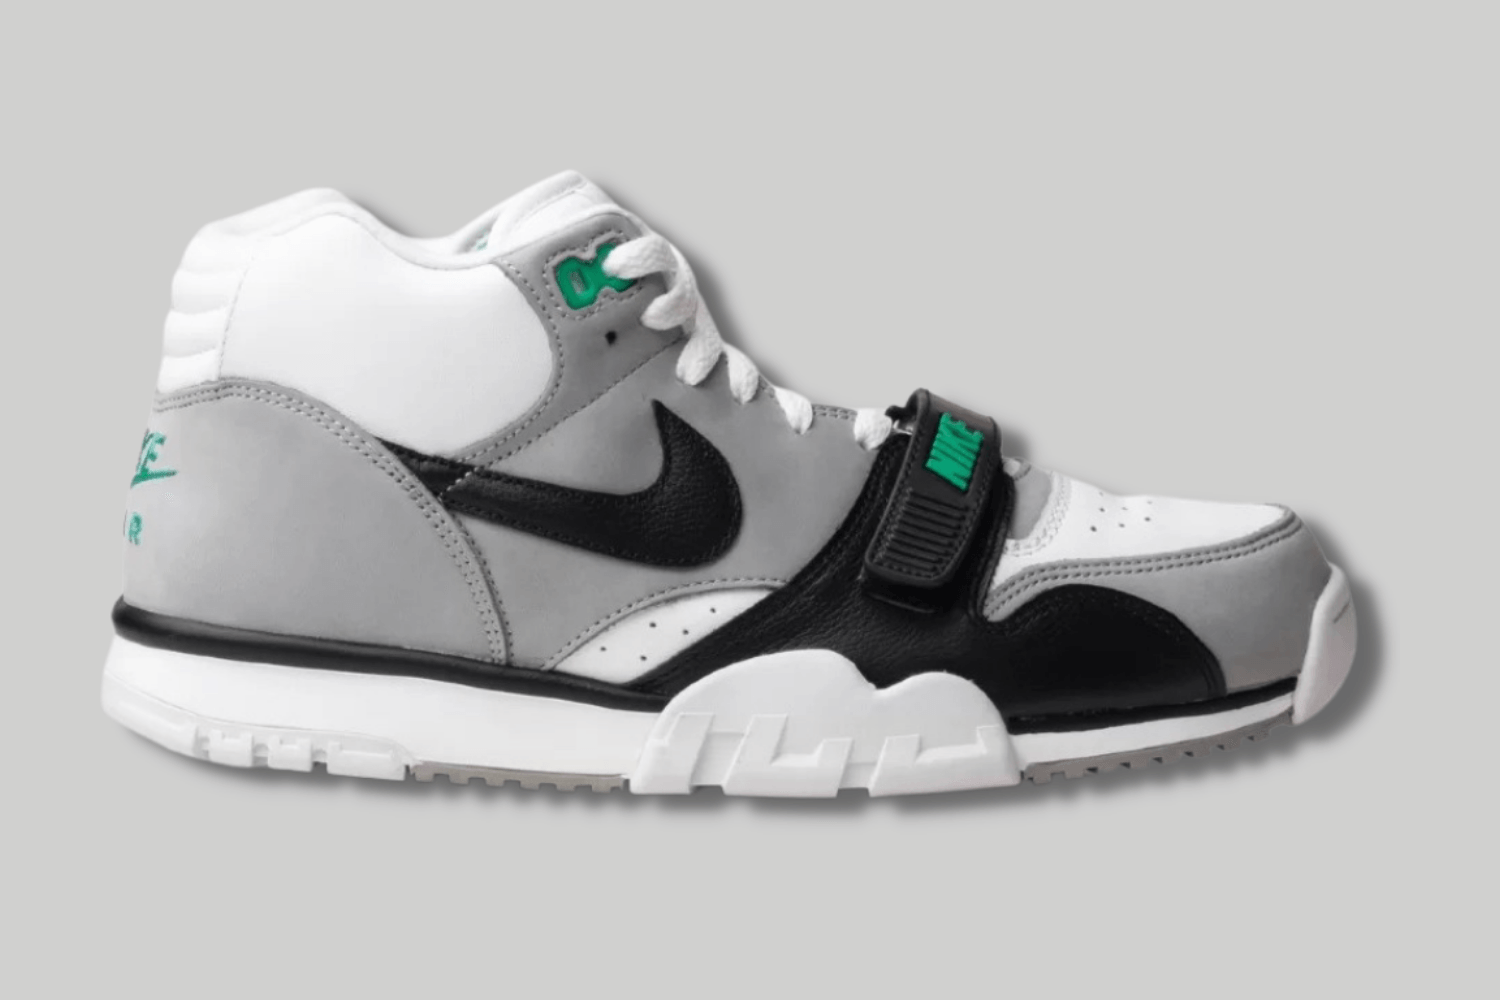 The Nike Air Trainer 1 Mid 'Chlorophyll' makes a comeback